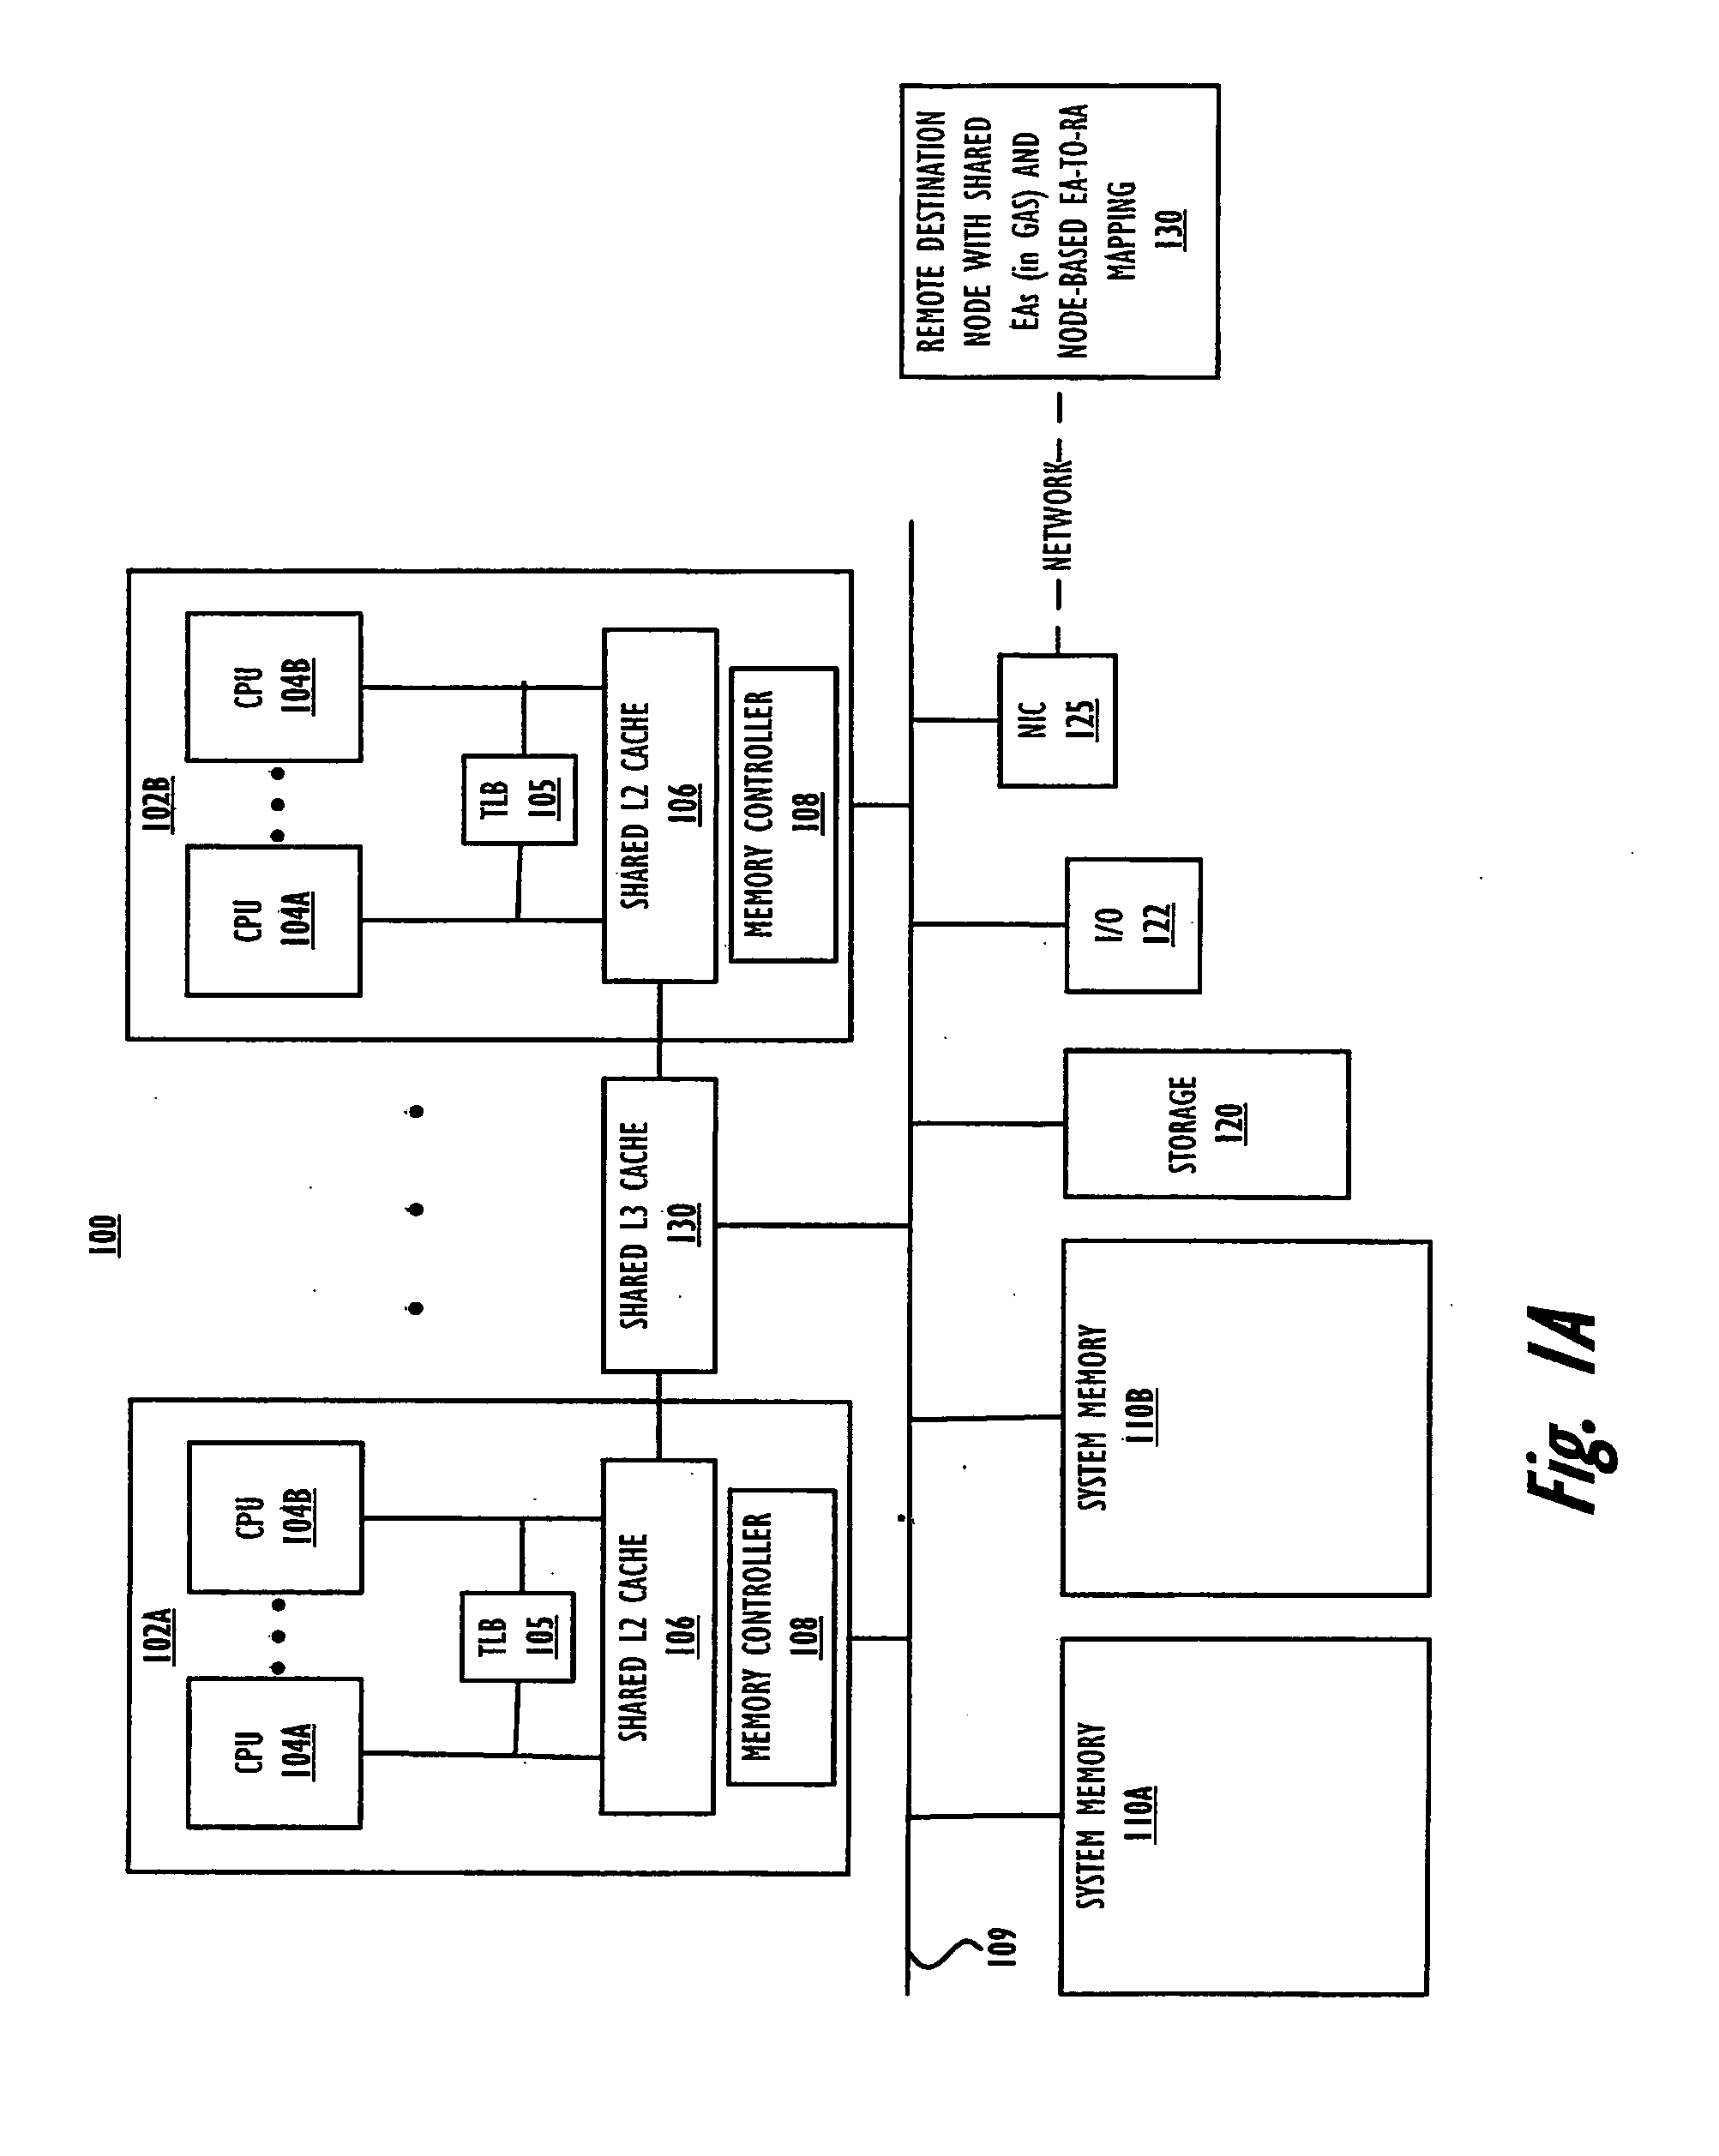 Specialized memory move barrier operations